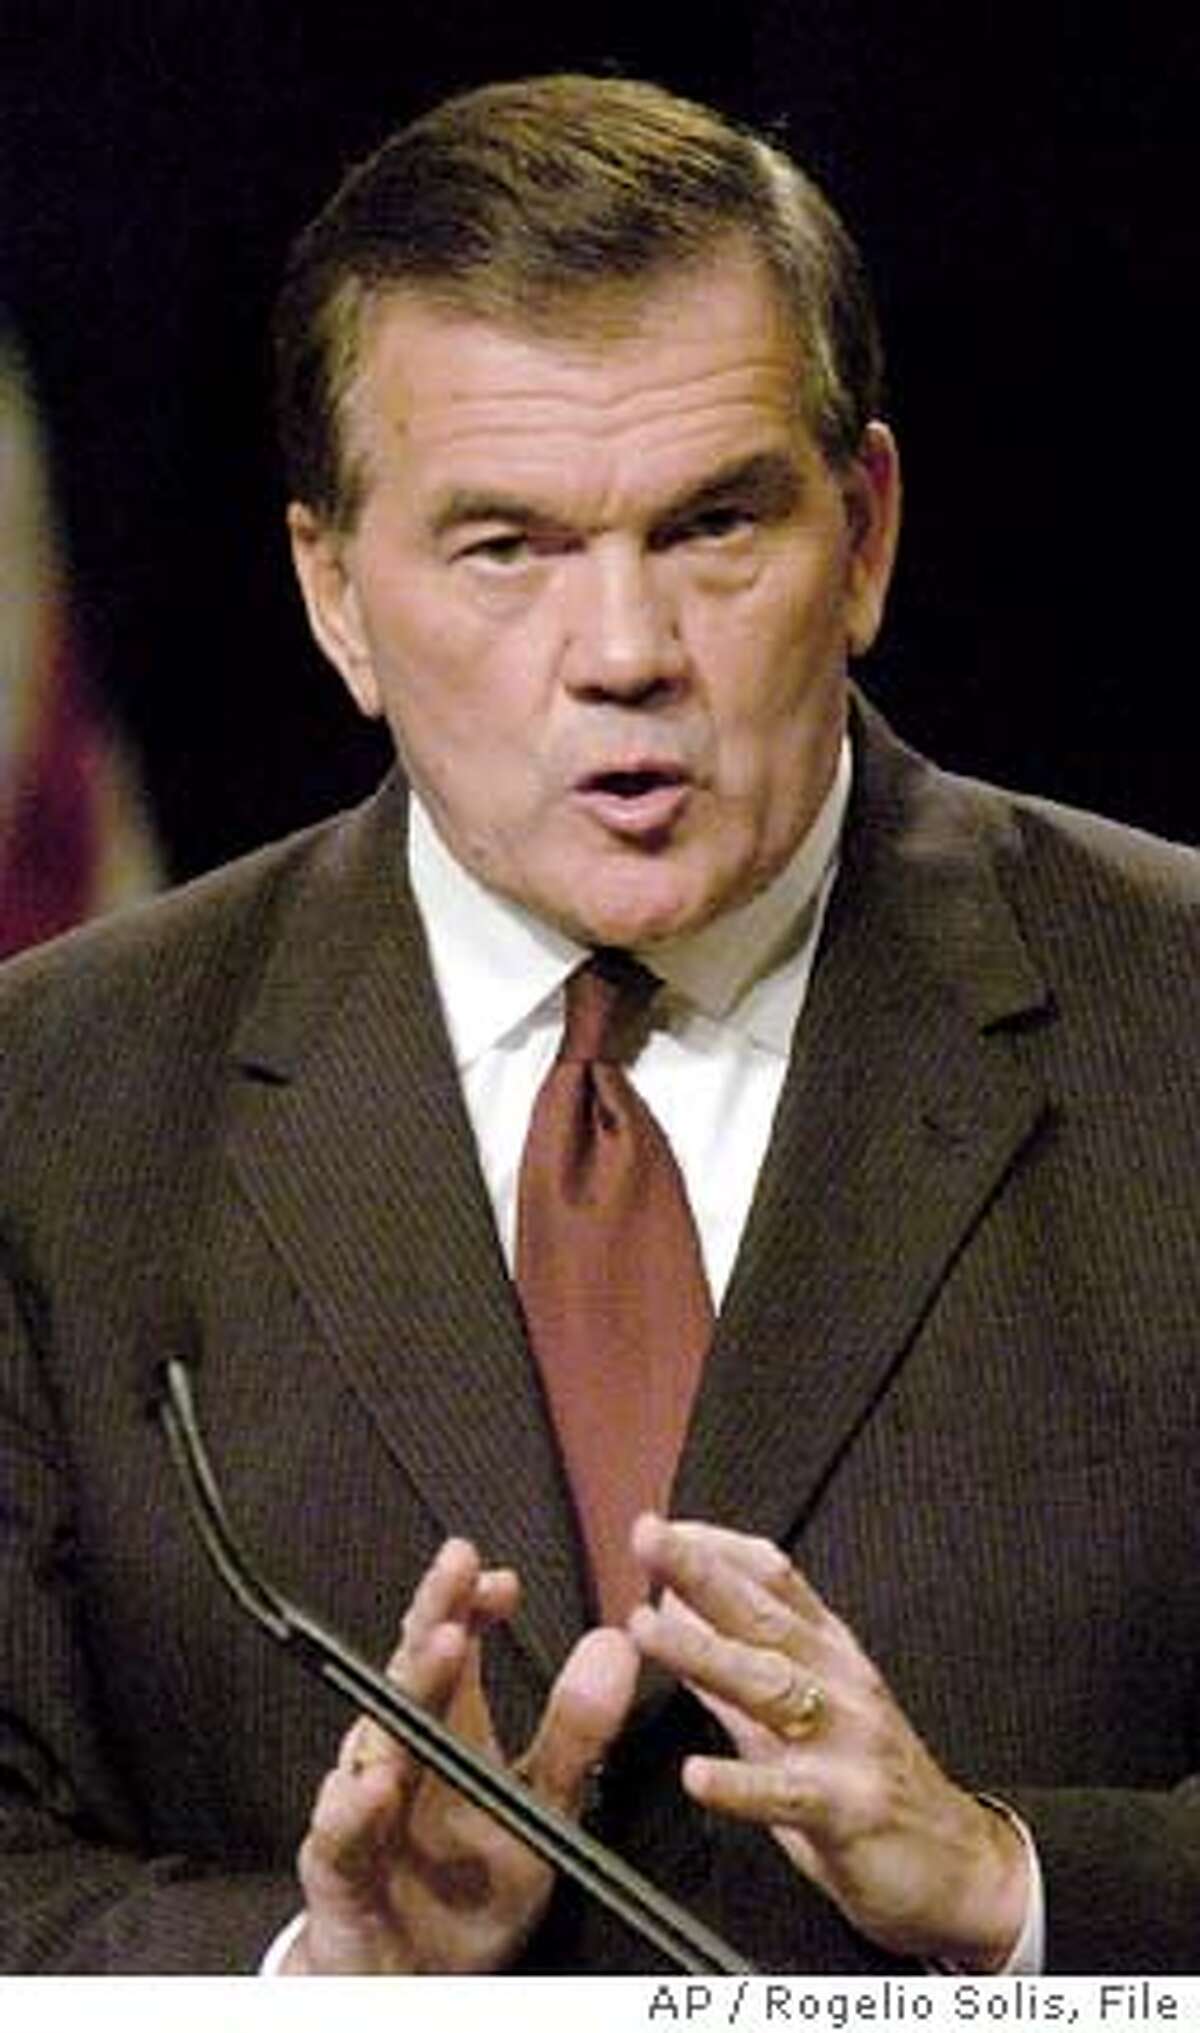 Homeland Security Secretary Tom Ridge addresses the Association, Friday, Nov. 19, 2004, in New Orleans, La. Ridge spoke on homeland security from a governor's perspective. Ridge is a former governor. (AP Photo/Rogelio Solis)